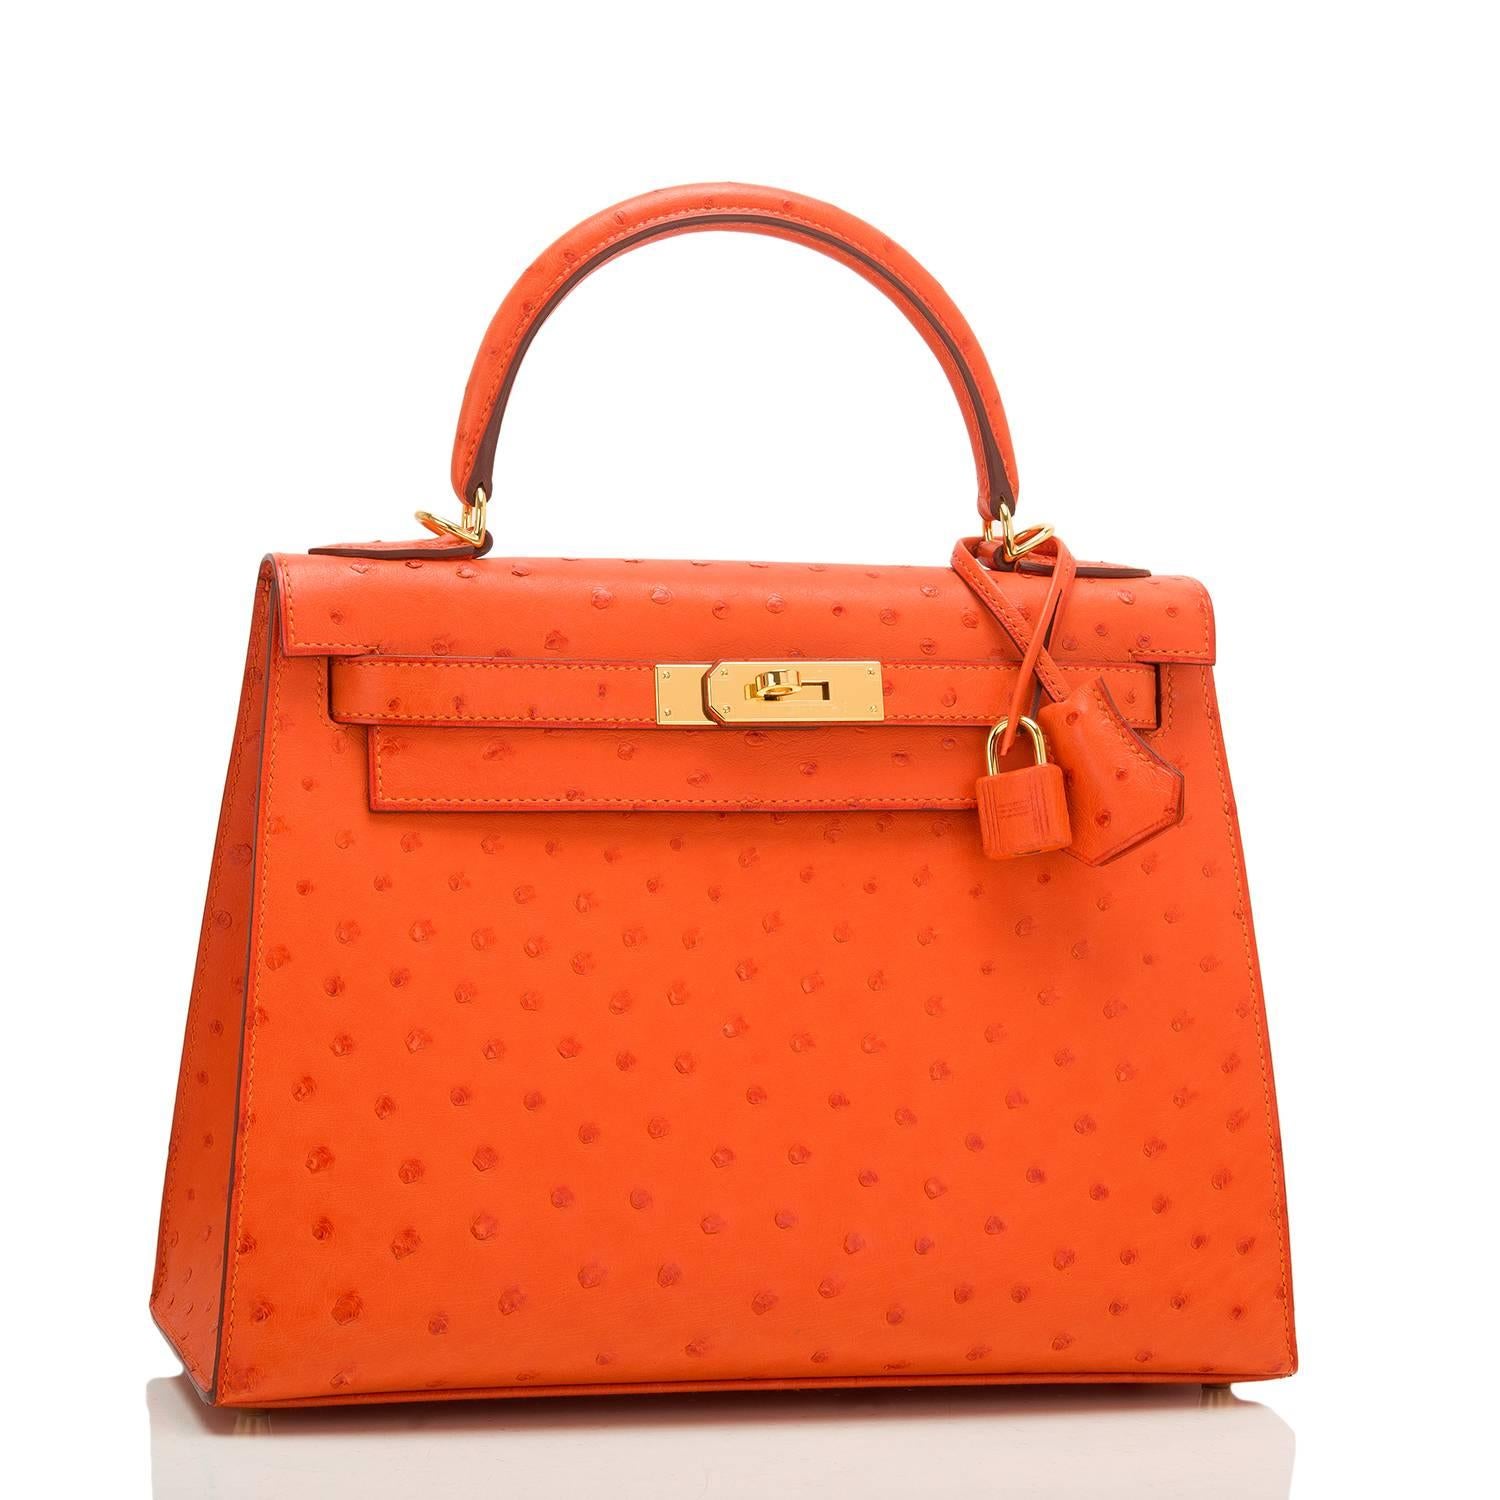 Hermes Tangerine Sellier Kelly 28cm of Ostrich with gold hardware.

This Kelly has tonal stitching, a front toggle closure, a clochette with lock and two keys and a single rolled handle.

The interior is lined with Tangerine chevre and has a zip